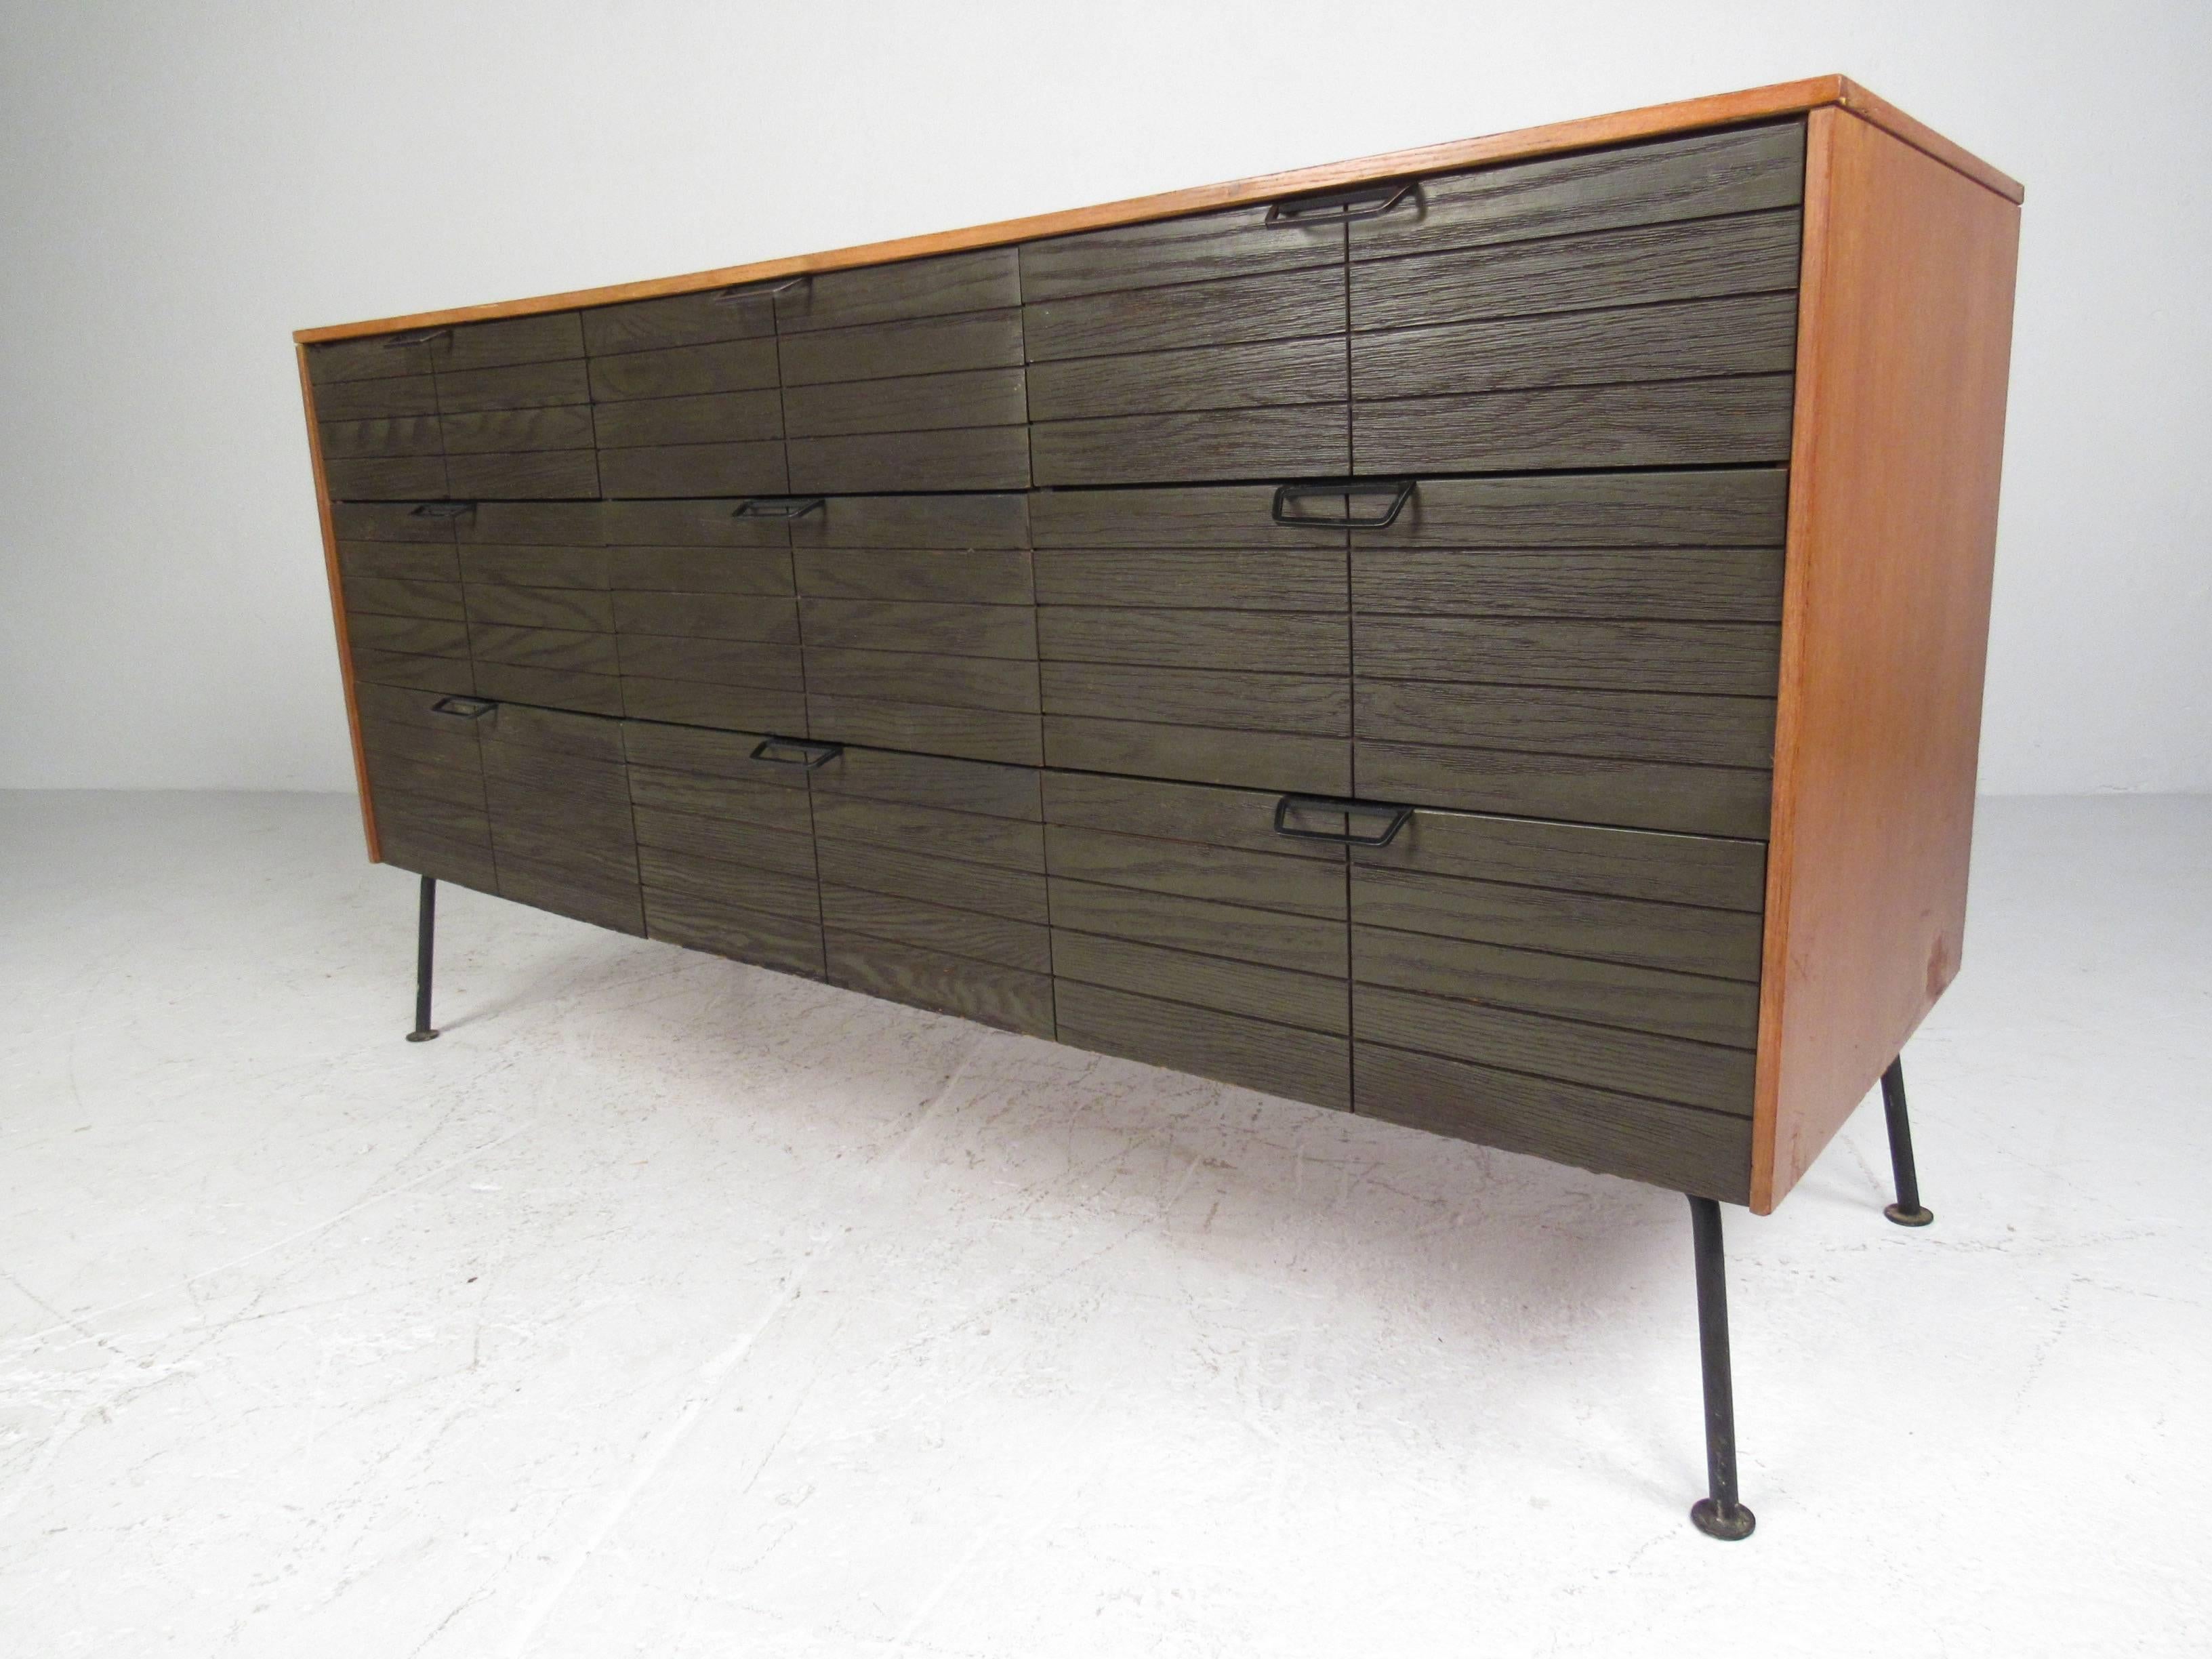 Rare nine-drawer dresser with vanity mirror designed by Raymond Loewy for the Mengel Furniture Company. 
Please confirm item location (NY or NJ). 